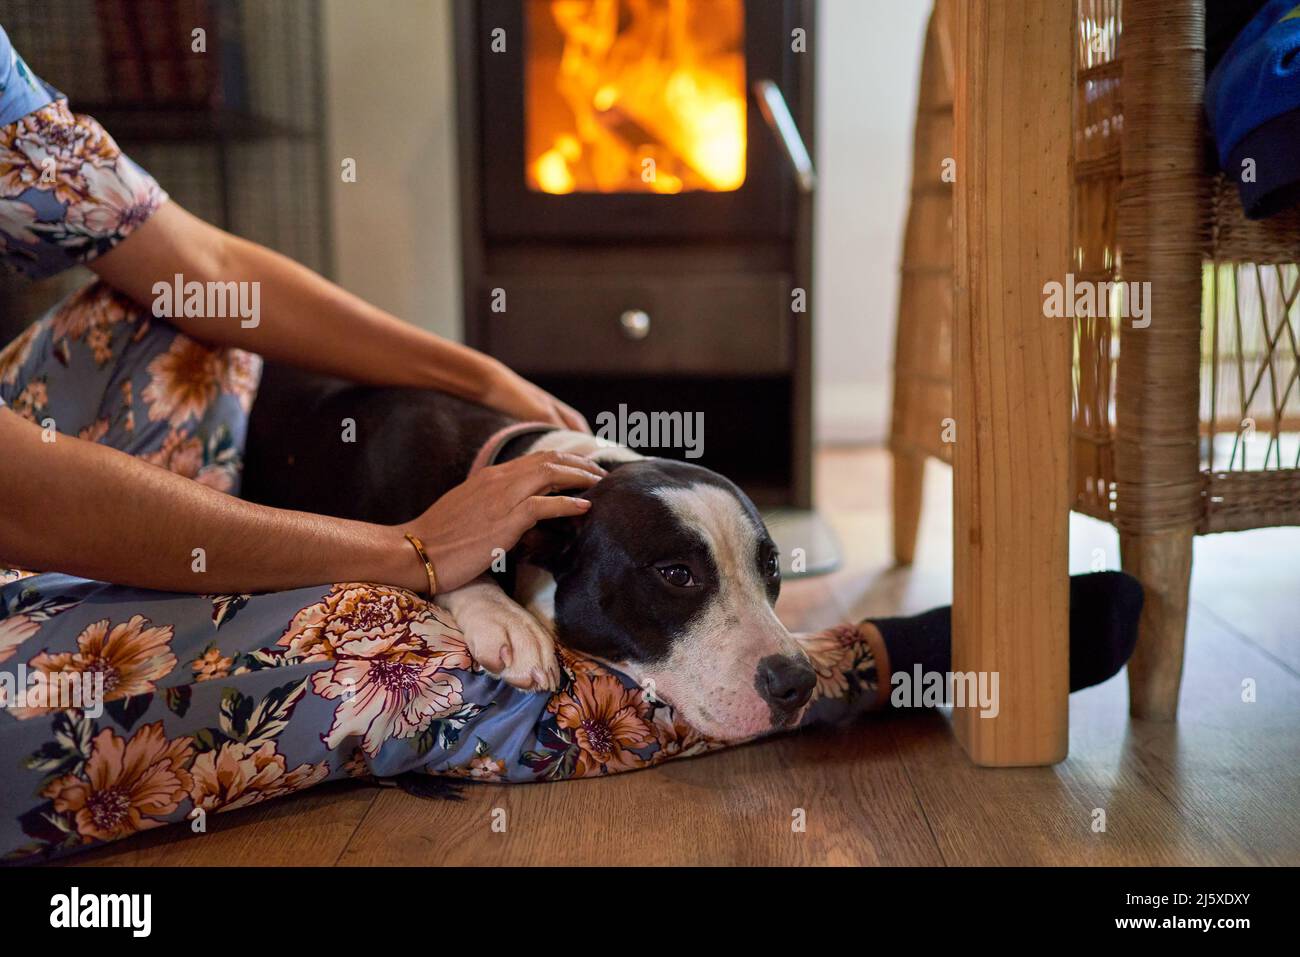 Woman petting dog on floor by fireplace Stock Photo